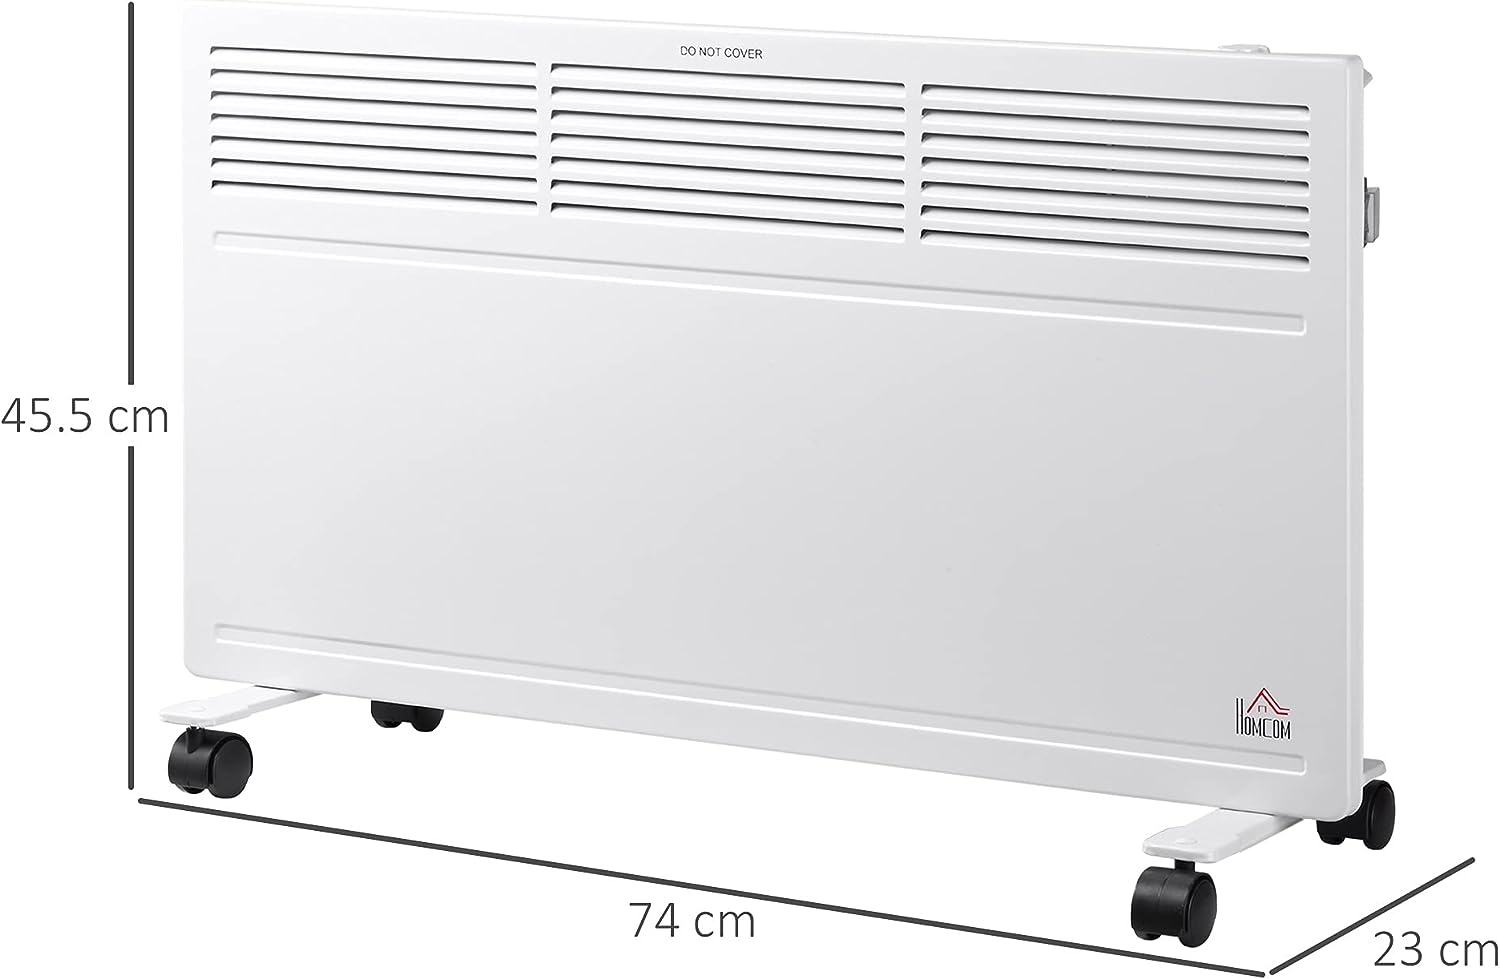 Maplin Plus Freestanding / Wall-Mounted Convector Portable Radiator Heater with Adjustable Thermostat - maplin.co.uk